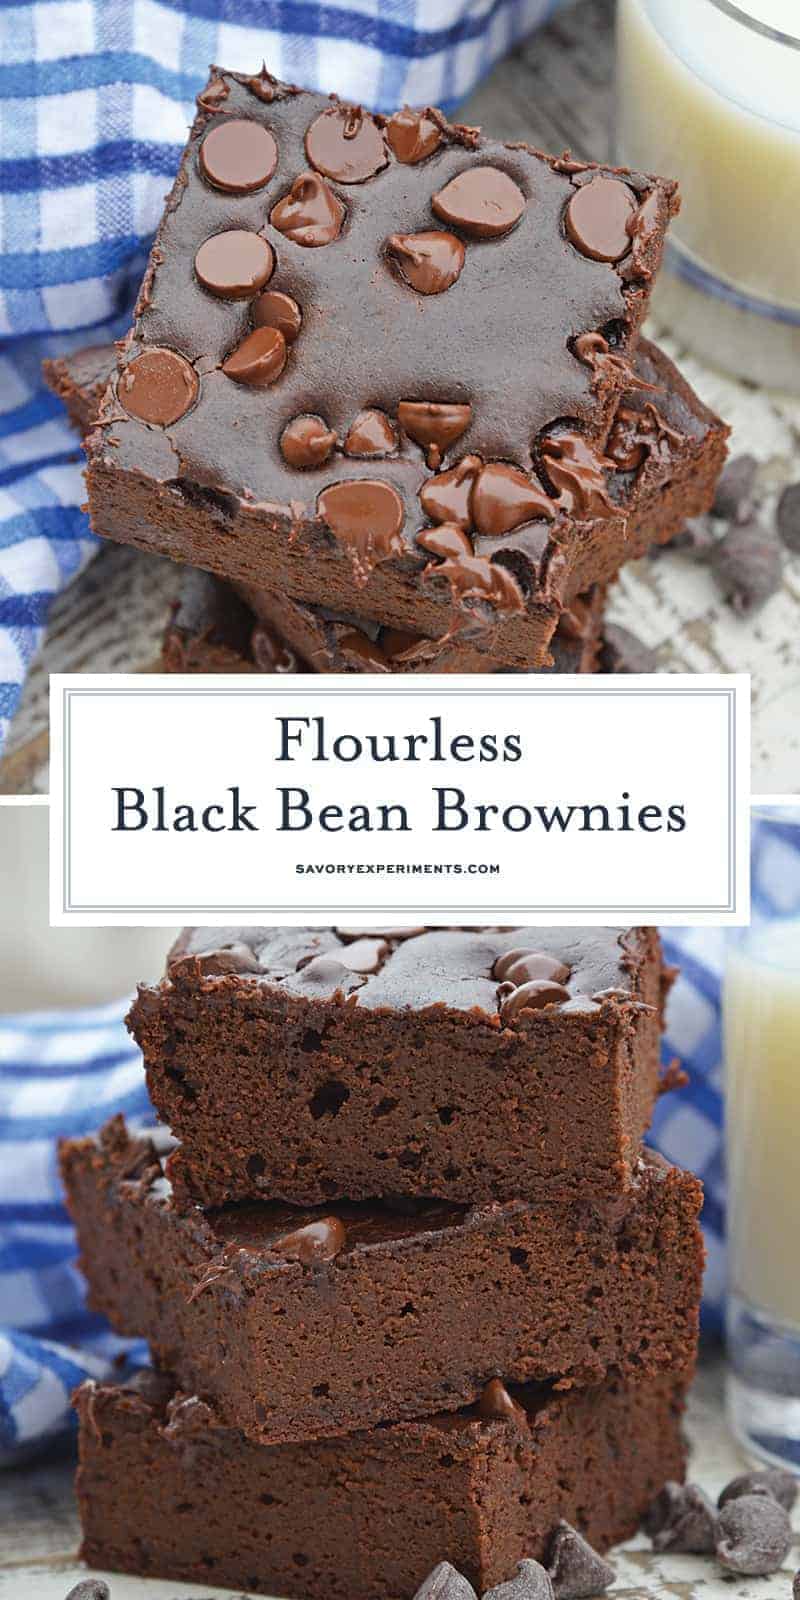 Flourless Black Bean Brownies are a delicious, fudgy gluten free brownie recipe. Healthy brownie recipes have never tasted this good! #glutenfreebrownies #homemadebrownies #flourlessbrownies #blackbeanbrownies www.savoryexperiments.com 